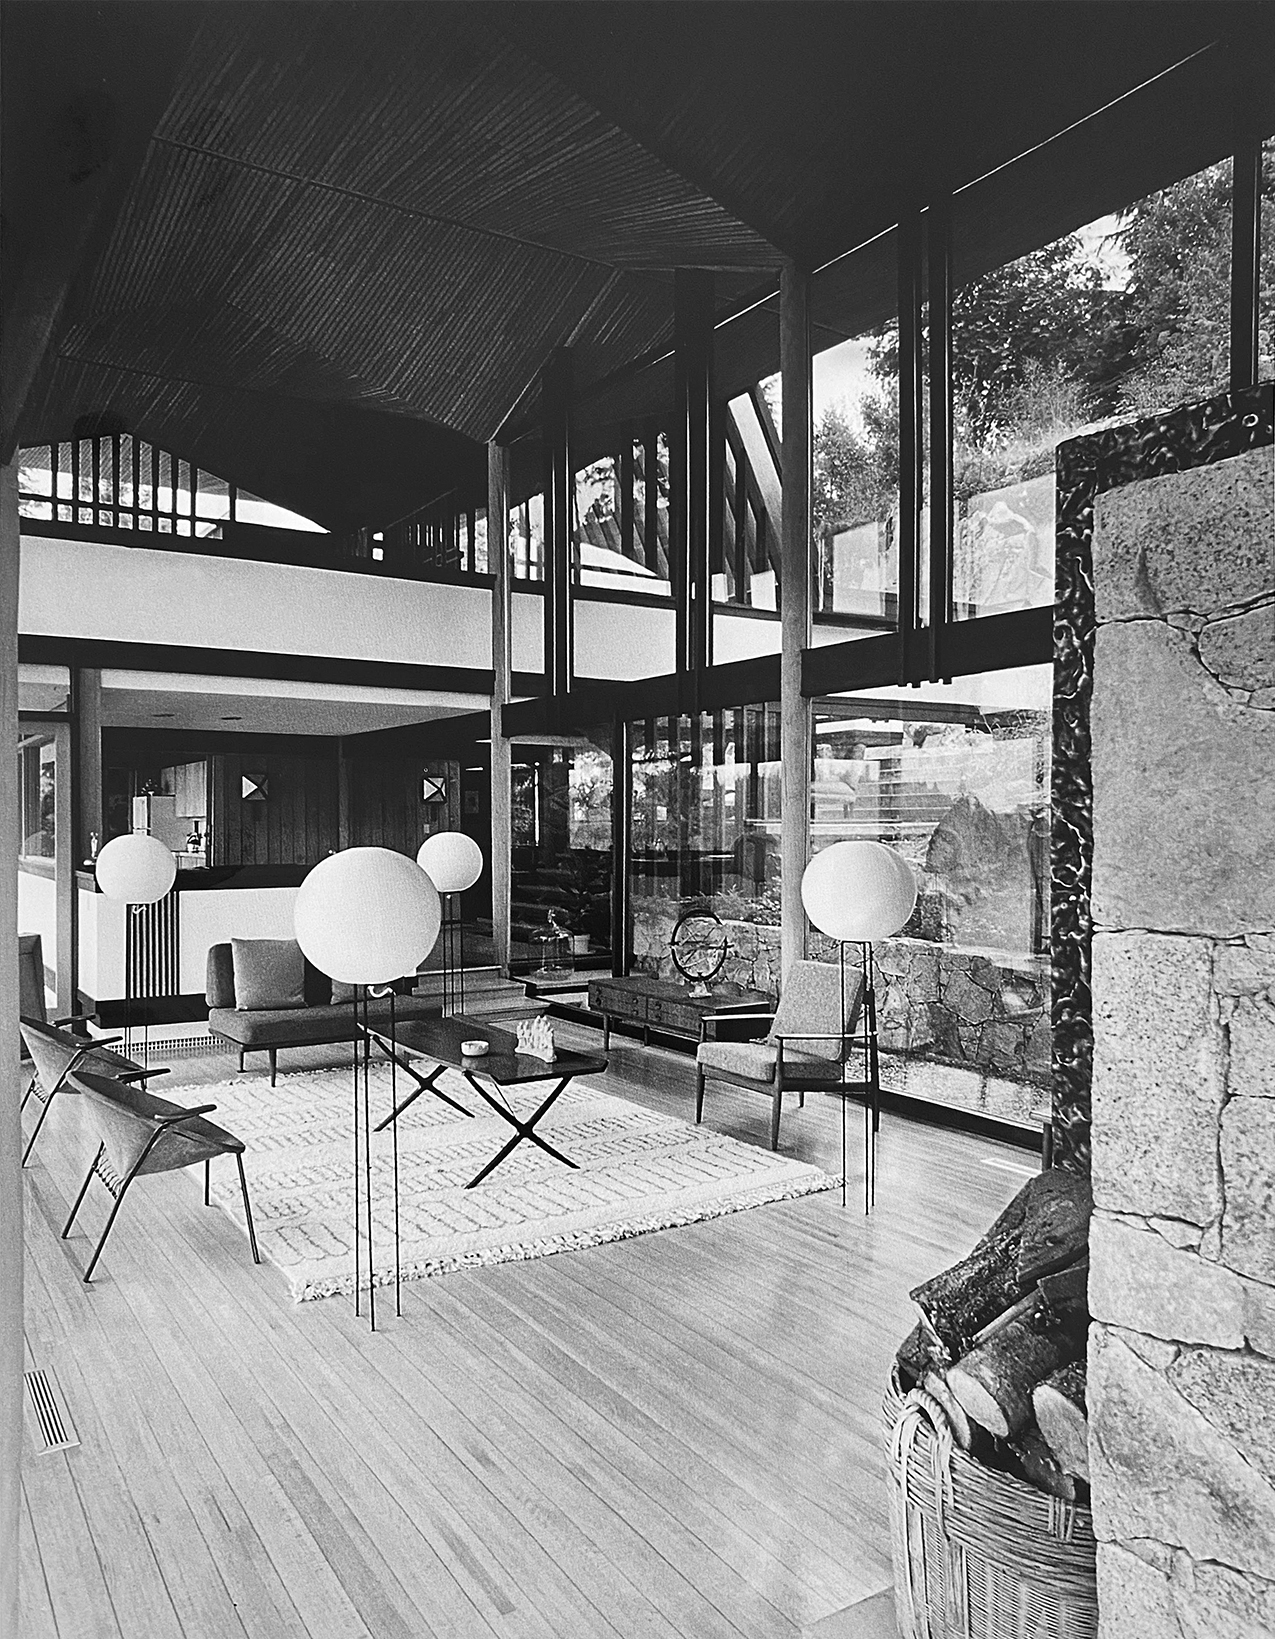 Beaton Residence, Arthur Müdry, Architect, 1965. Photo: Selwyn Pullan, 1965. Collection of West Vancouver Art Museum.